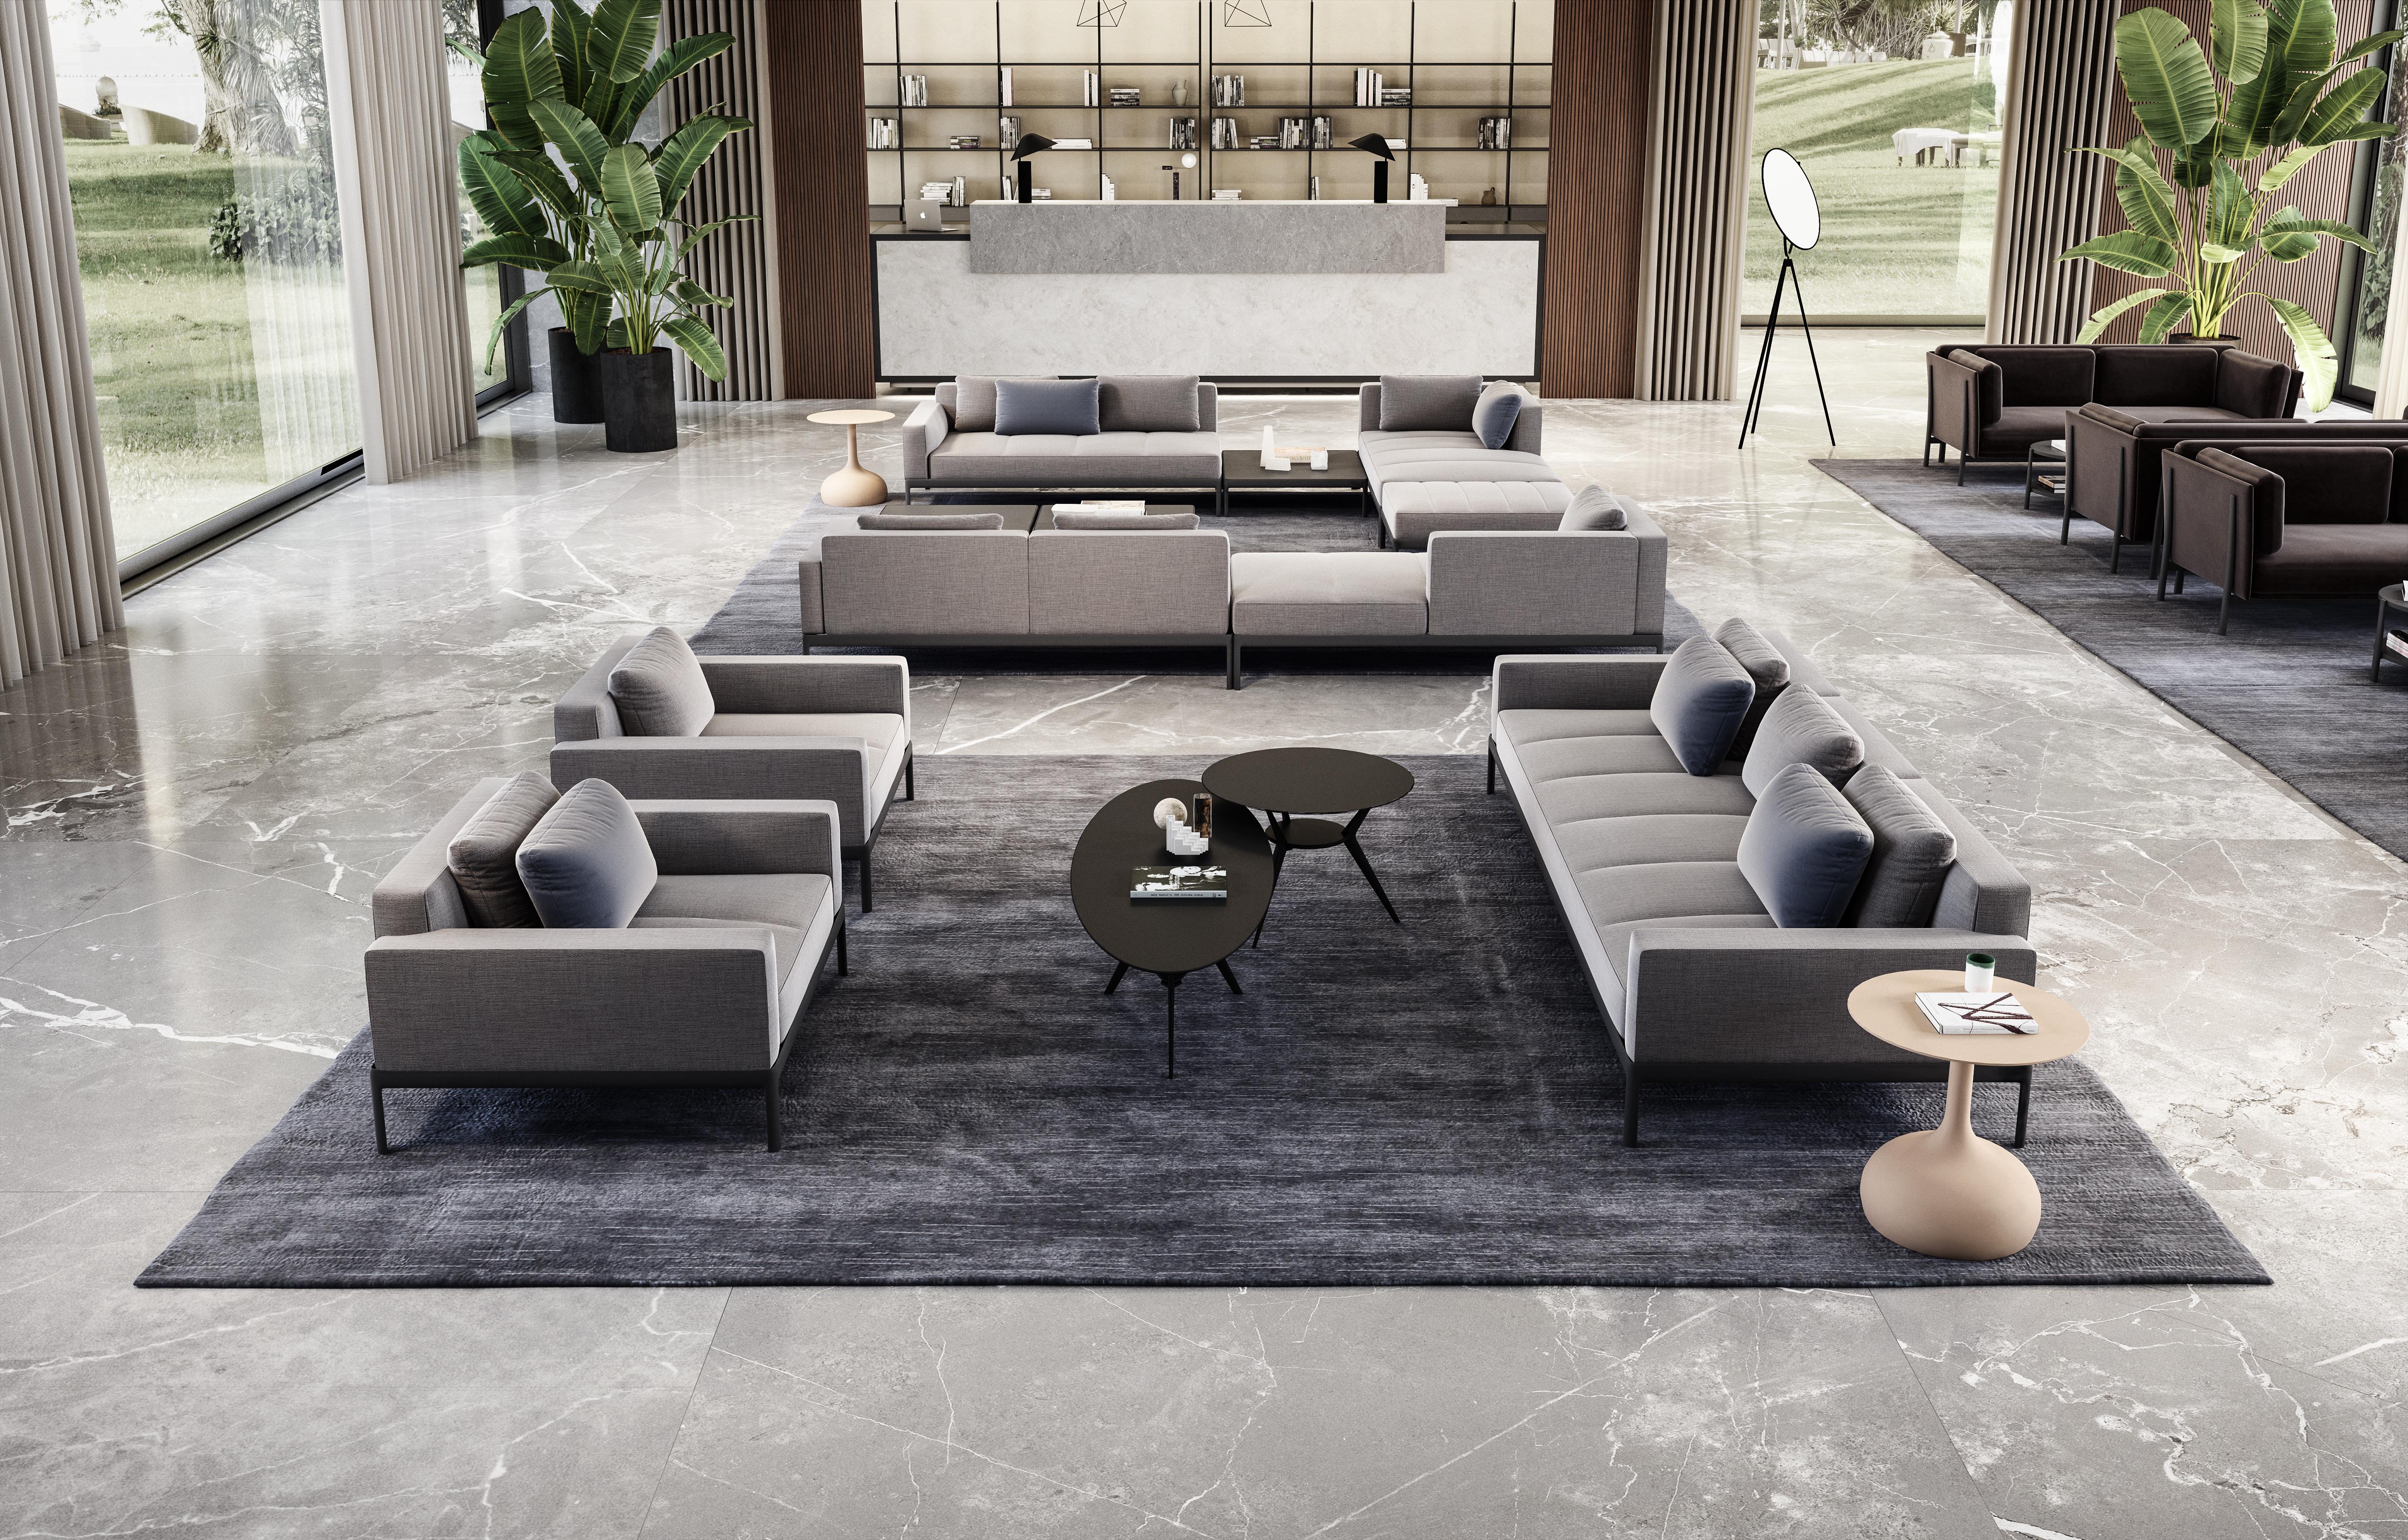 Alias P39+P34+P45+P54 AluZen Sectional Sofa in Fabric & Polished Aluminium Frame by Ludovica & Roberto Palomba

Central modular element 160x95 cm.
Modular element with structure in lacquered or polished aluminium. Seat and back with removable